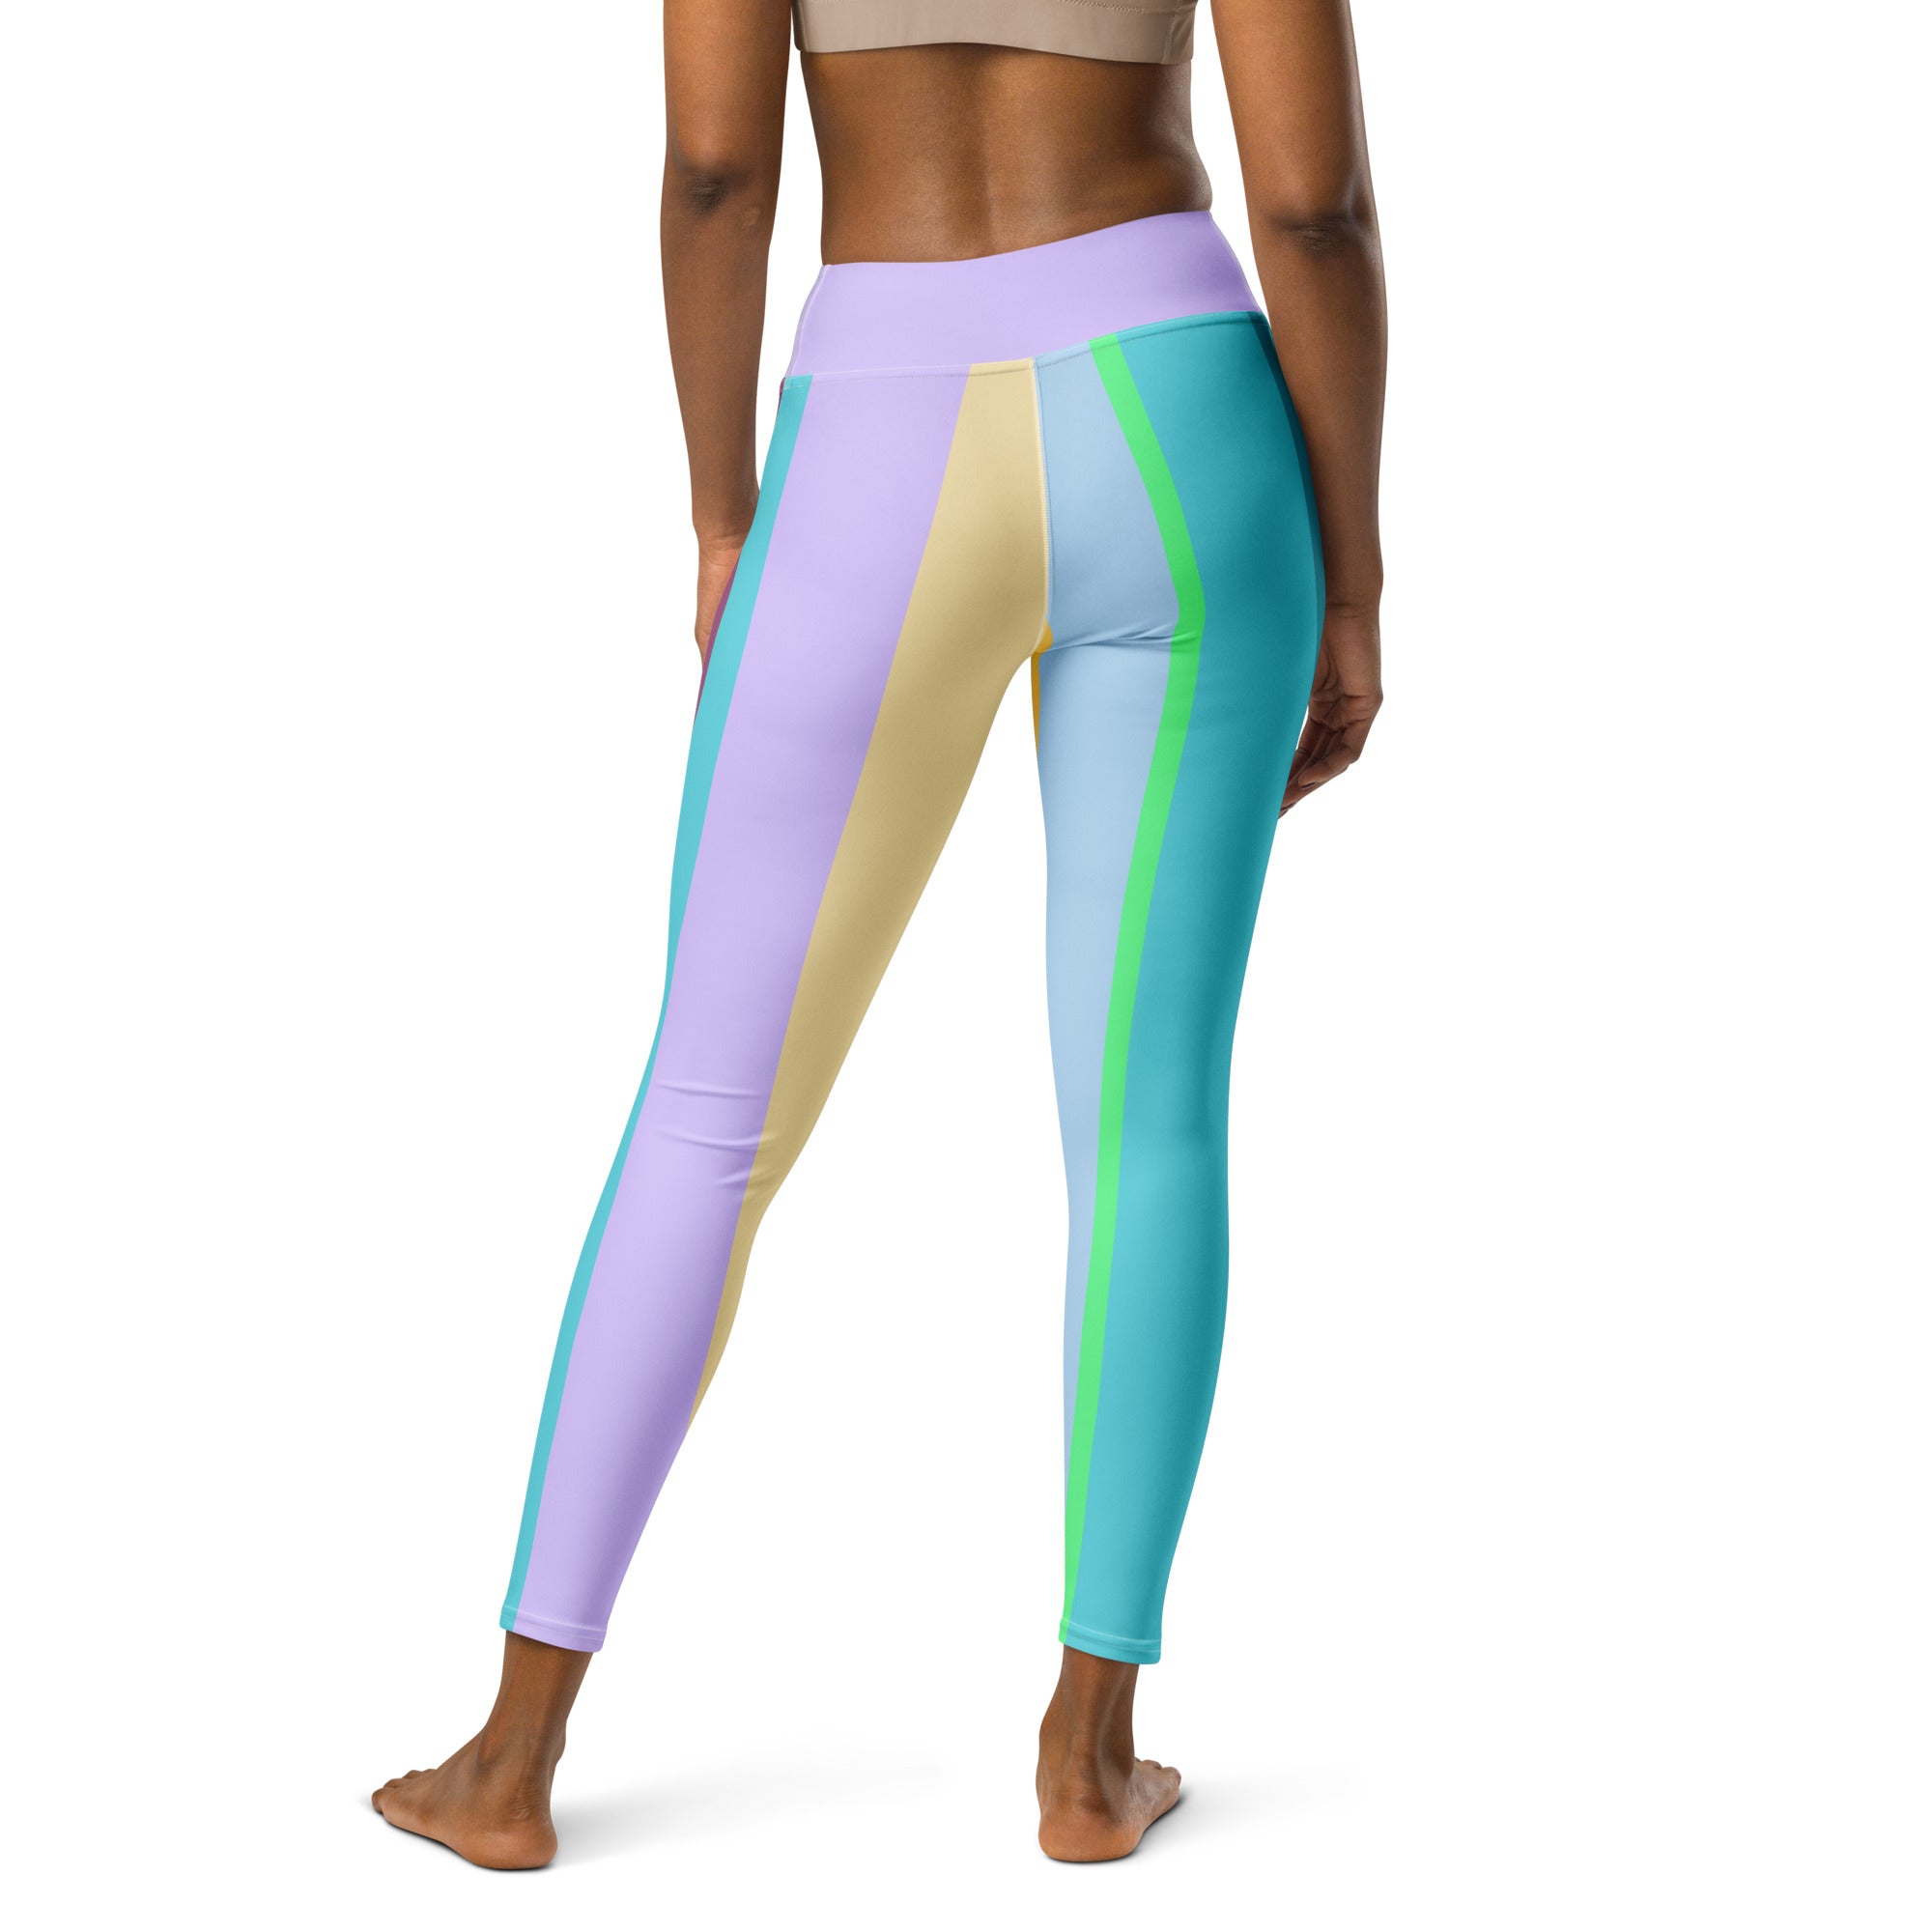 Elegant and durable yoga leggings with a nautical theme for all body types.